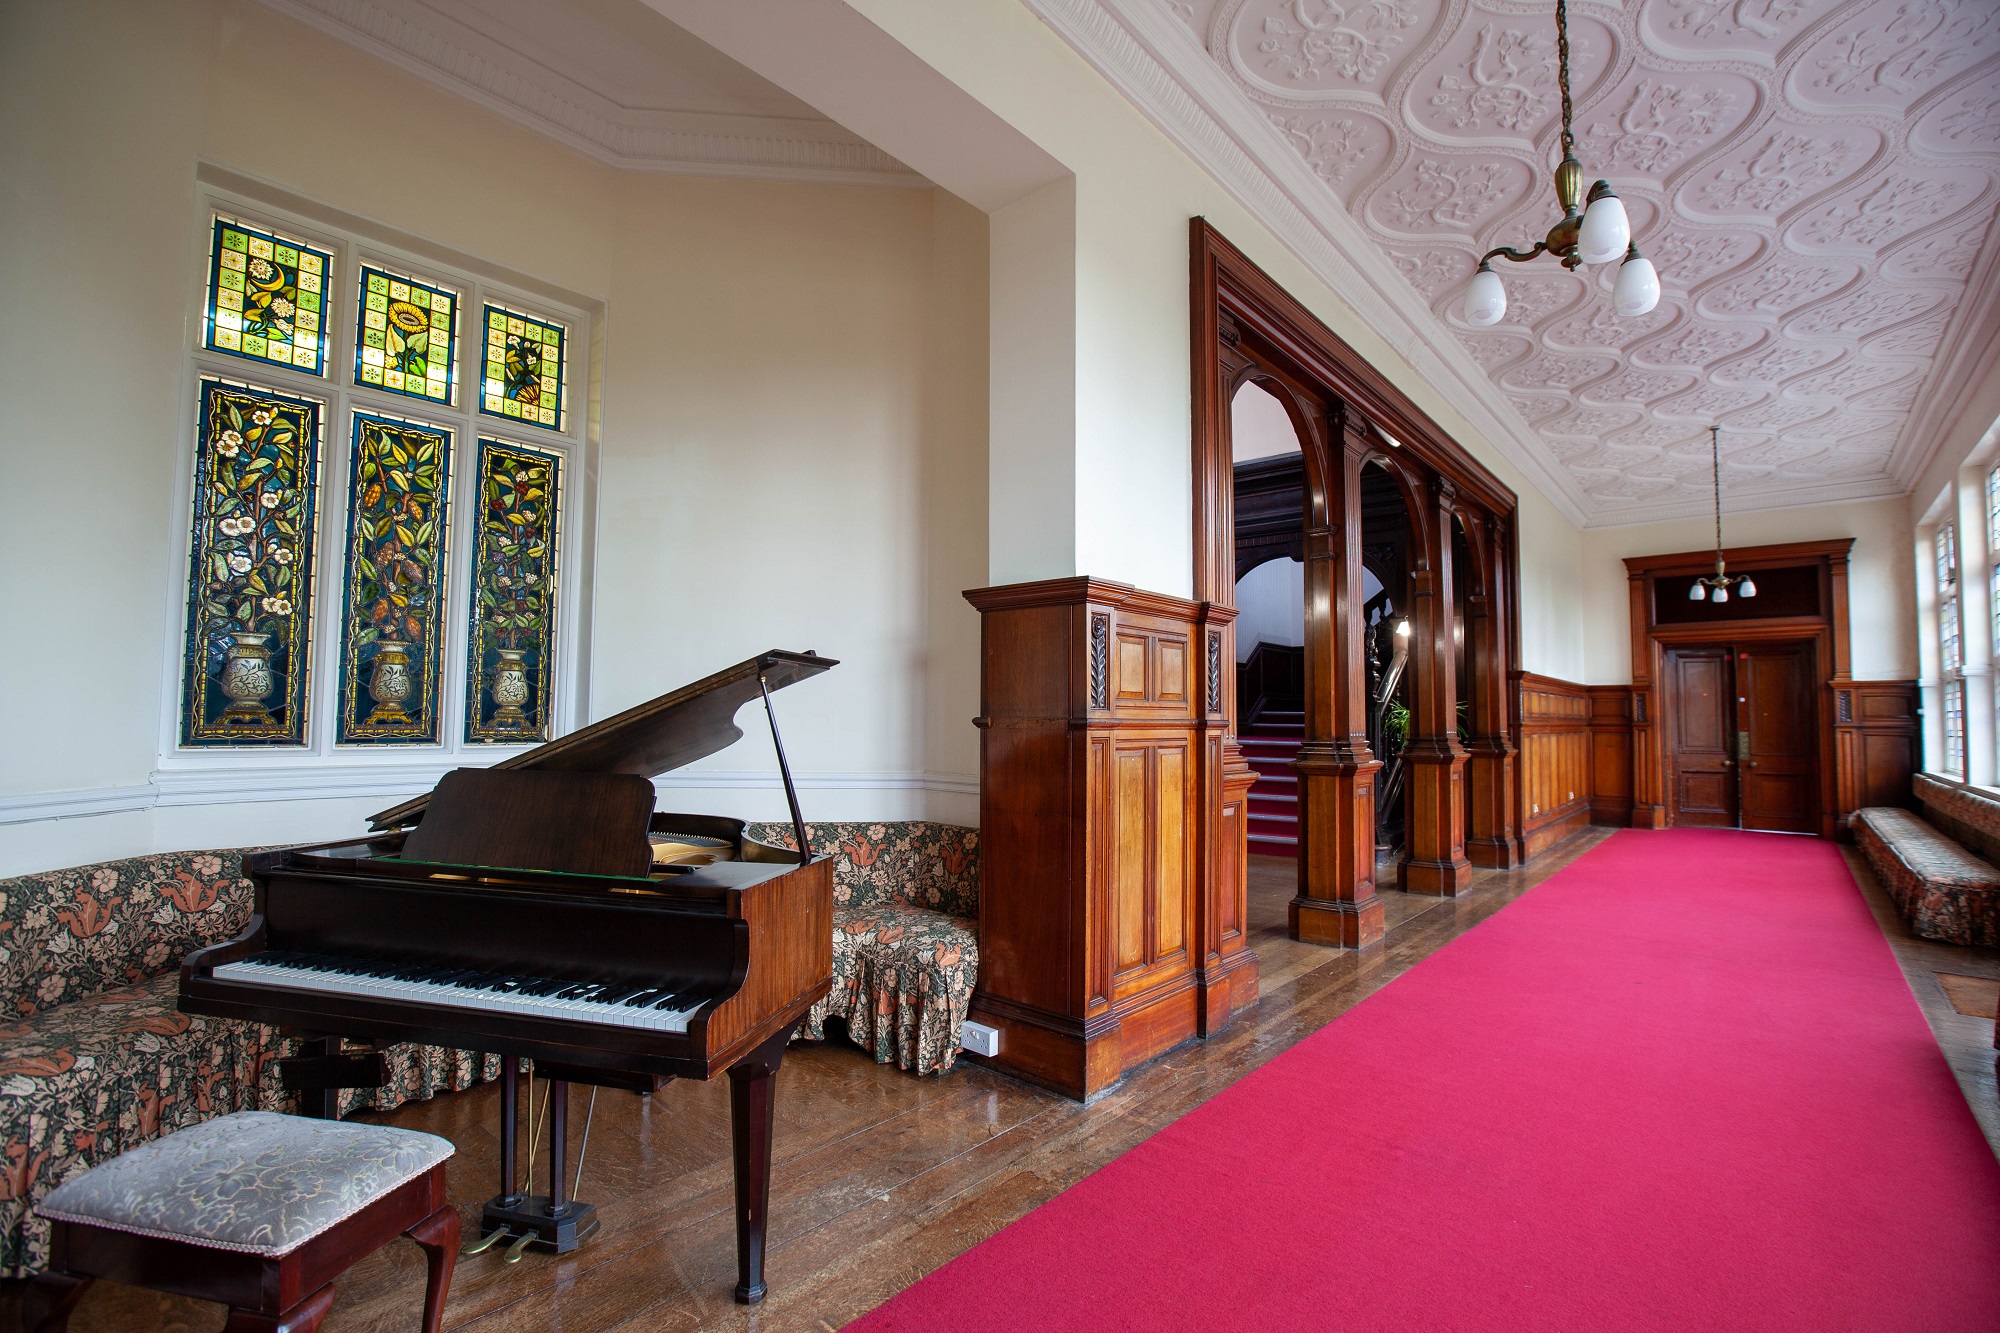 Queensmead House School interior with Grand Piano.